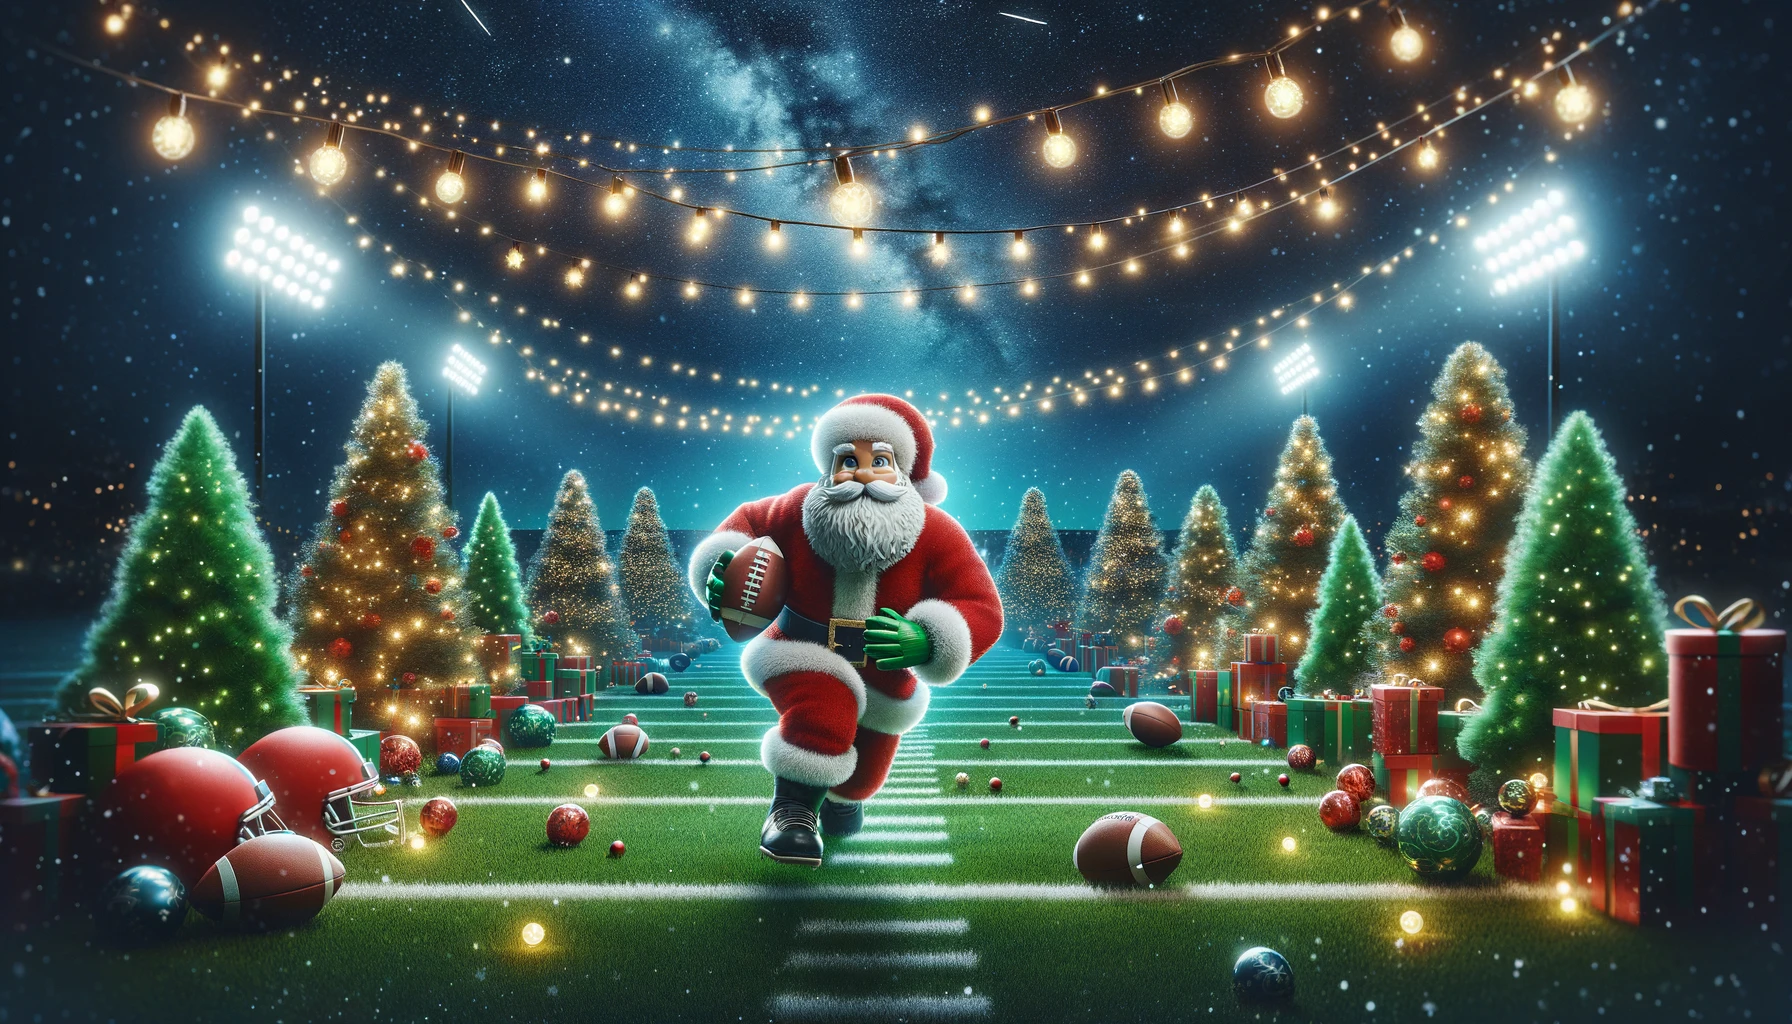 Festive Football Game with Santa Claus